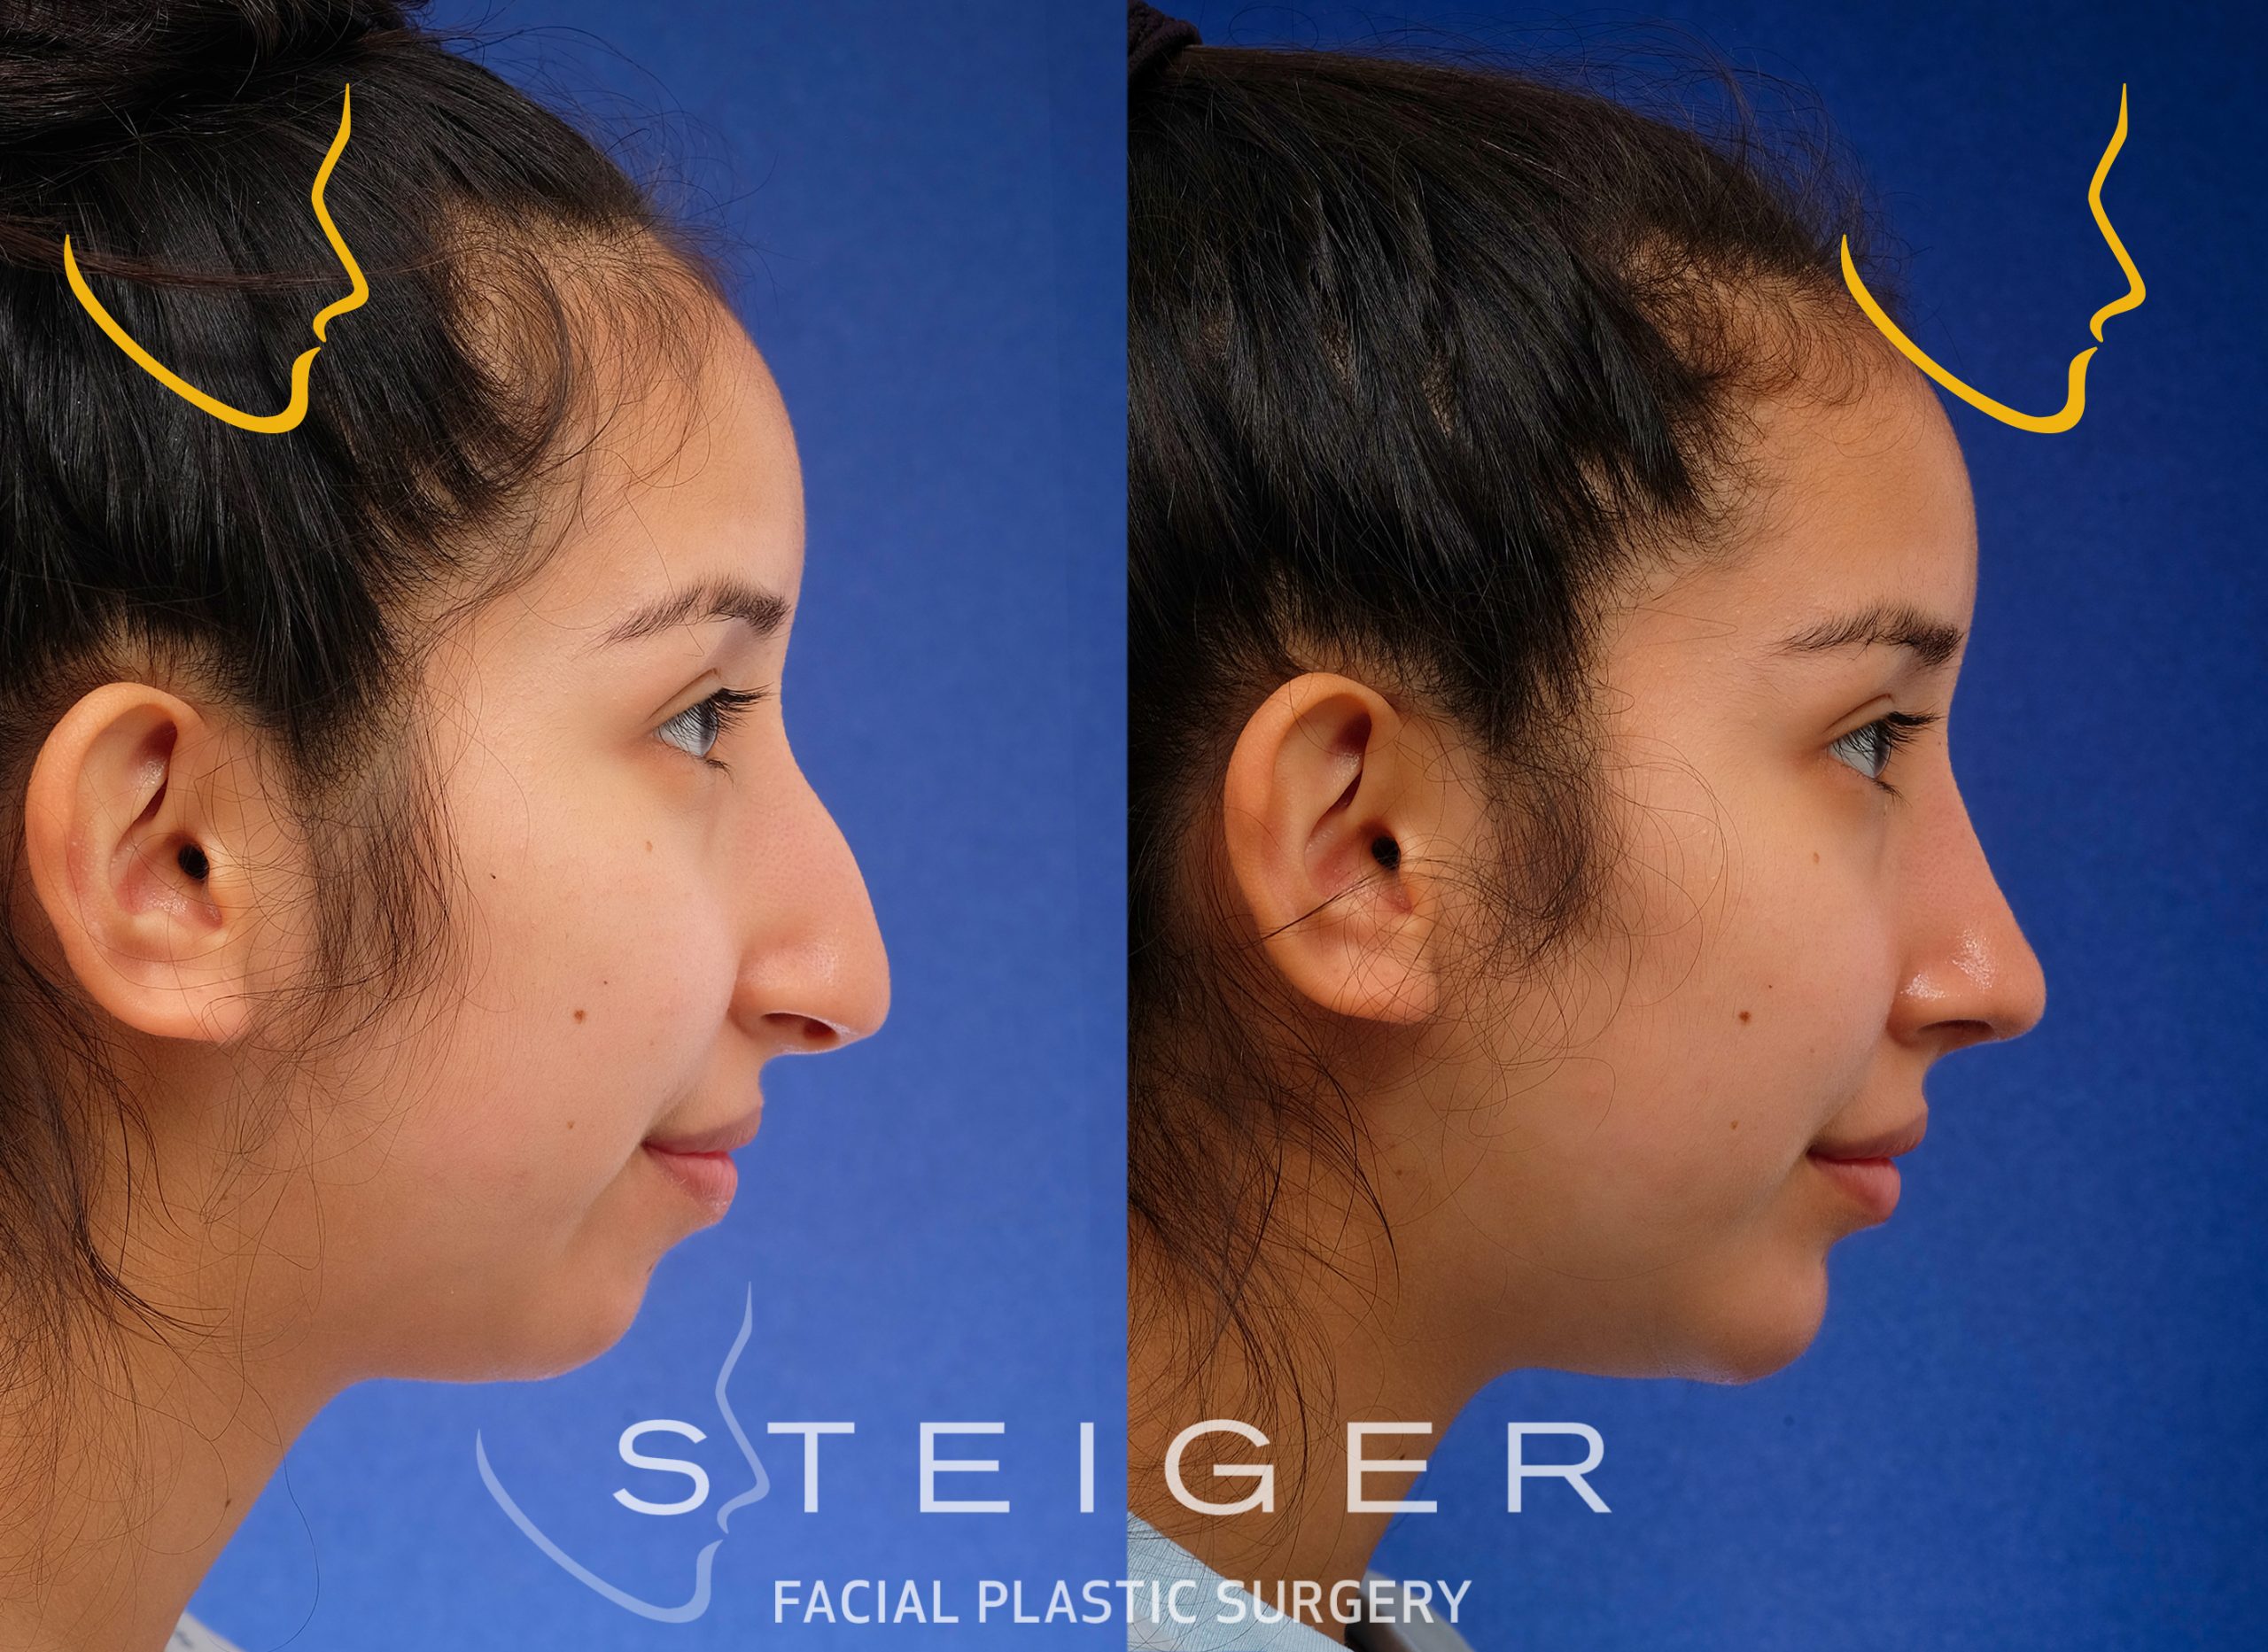 Rhinoplasty and chin implant for a droopy nose